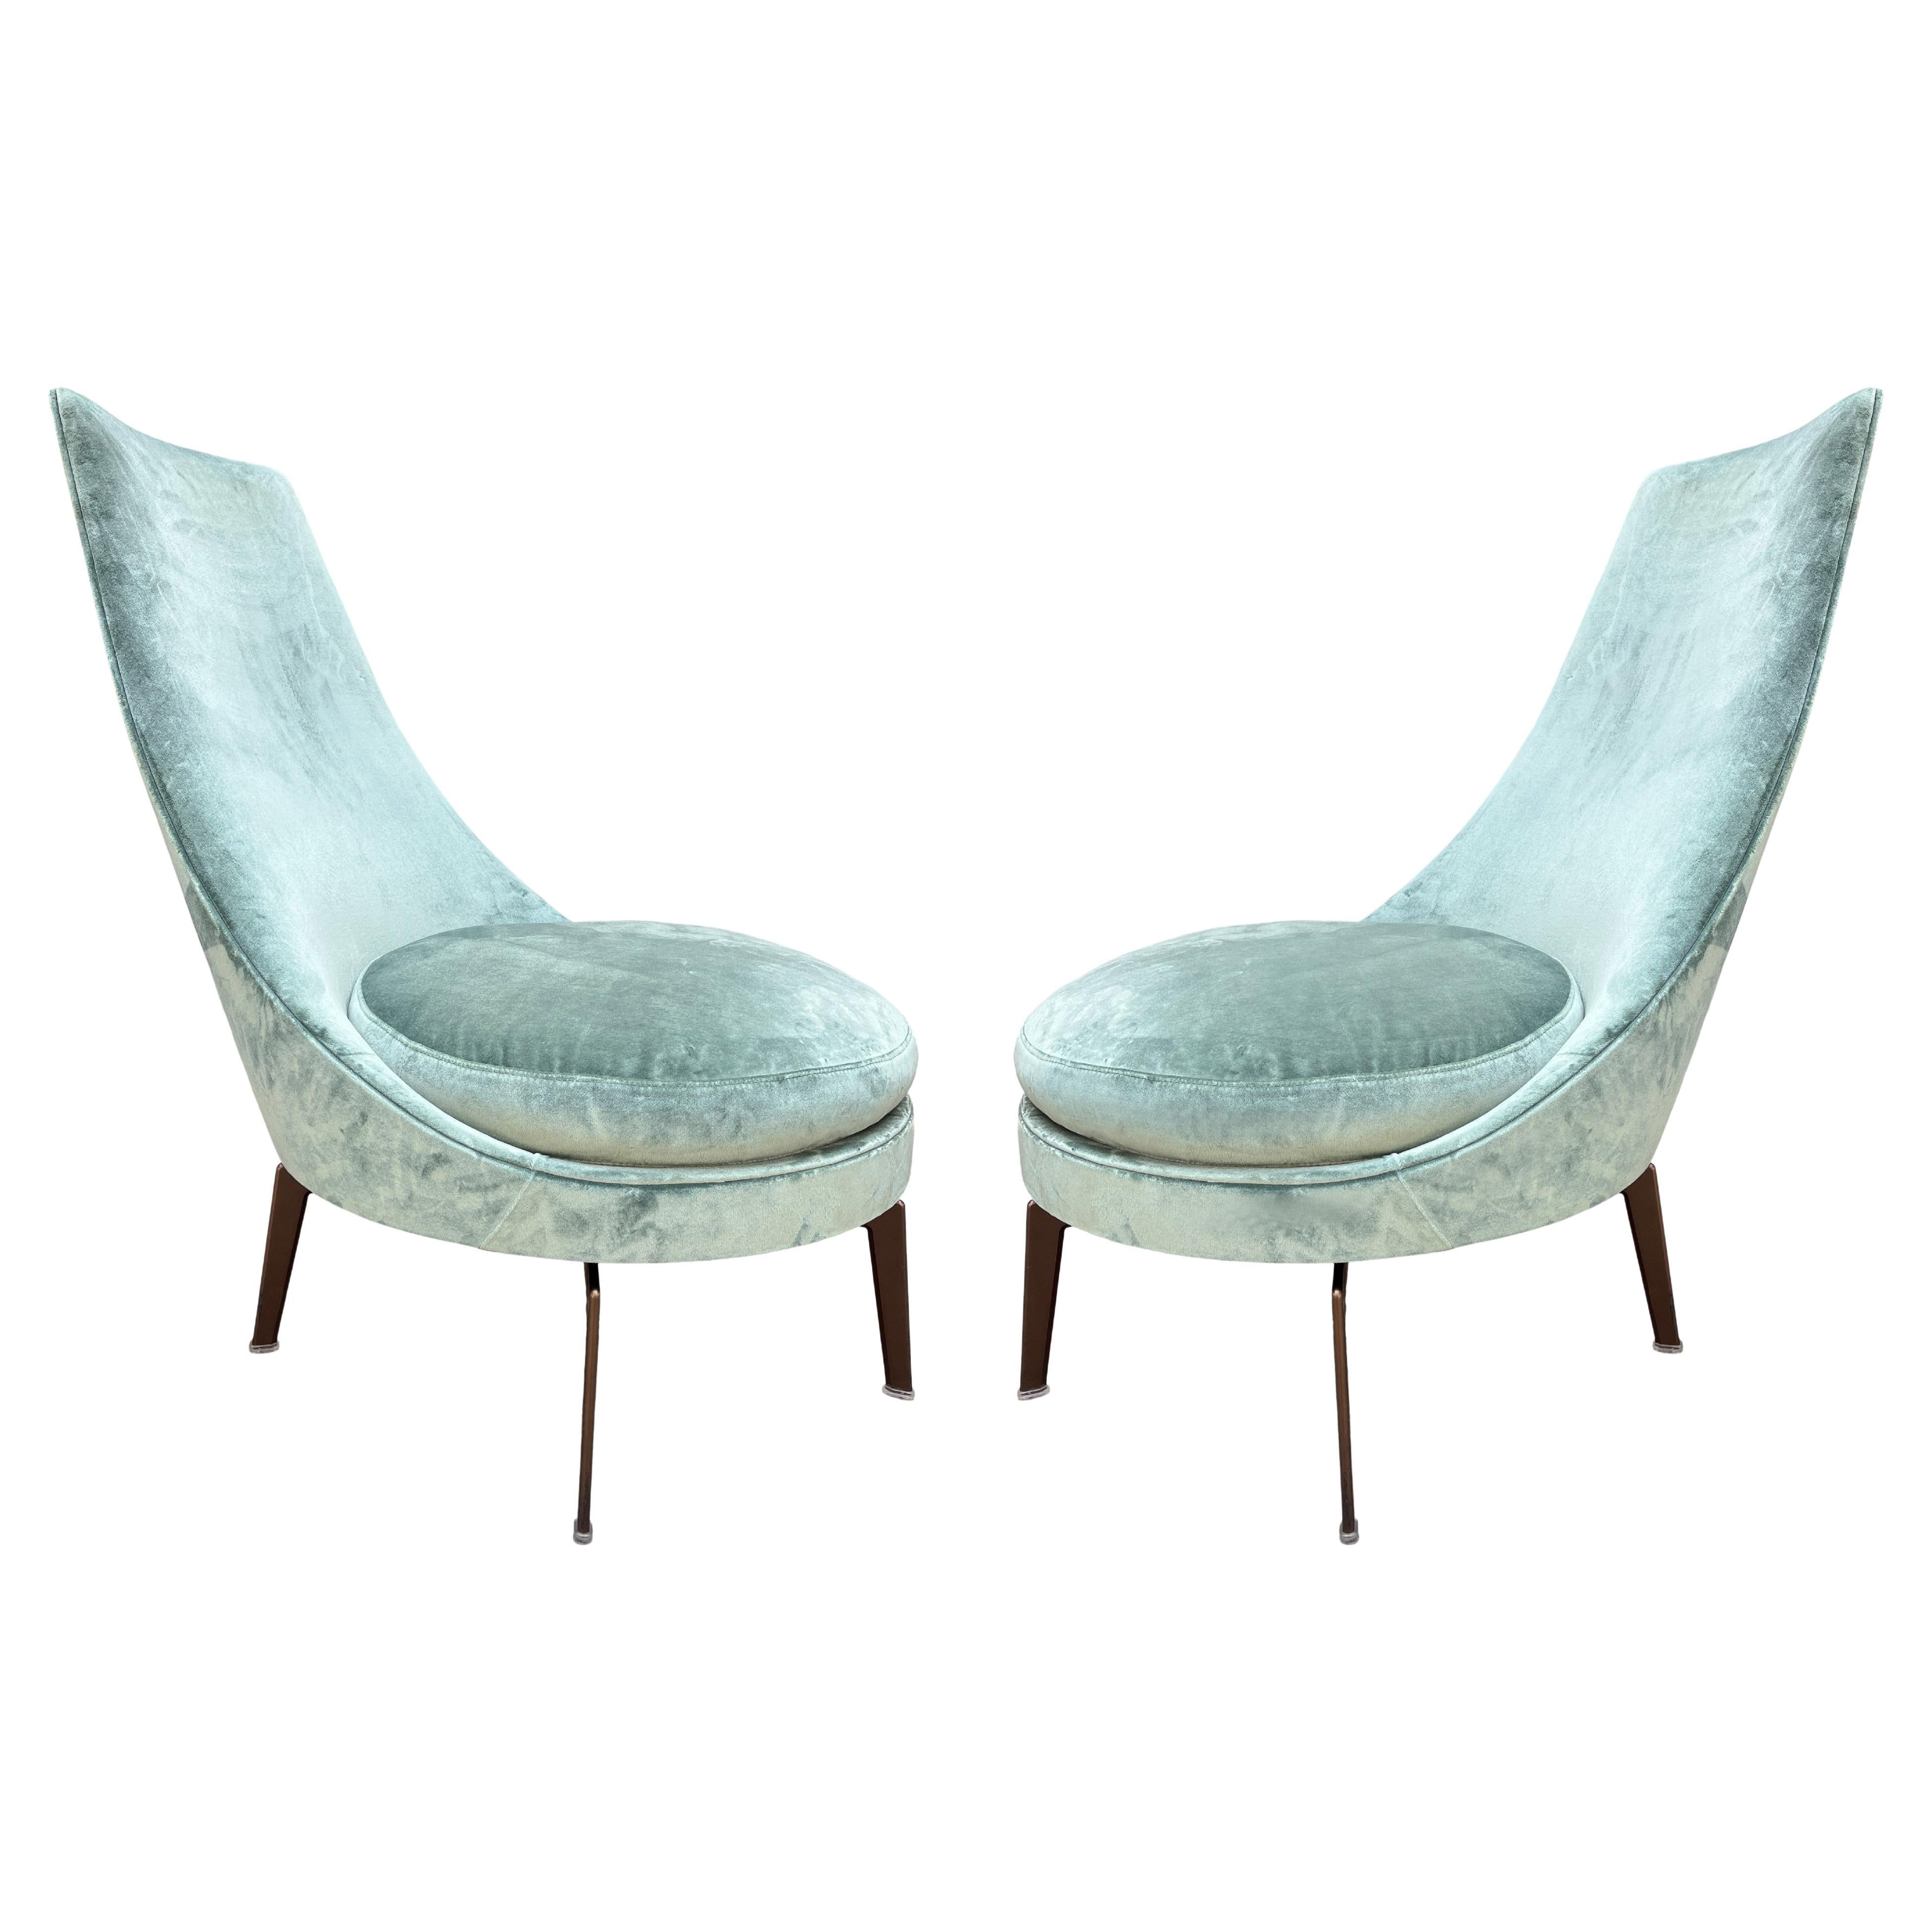 Stunning Post-Modern Guscioalto Lounge chair by Antonio Citterio for Flexform. Sea foam velvet upholstery adds a touch of luxury and elegance to any space, while the plush cushioning ensures maximum comfort during extended periods of use. The chair